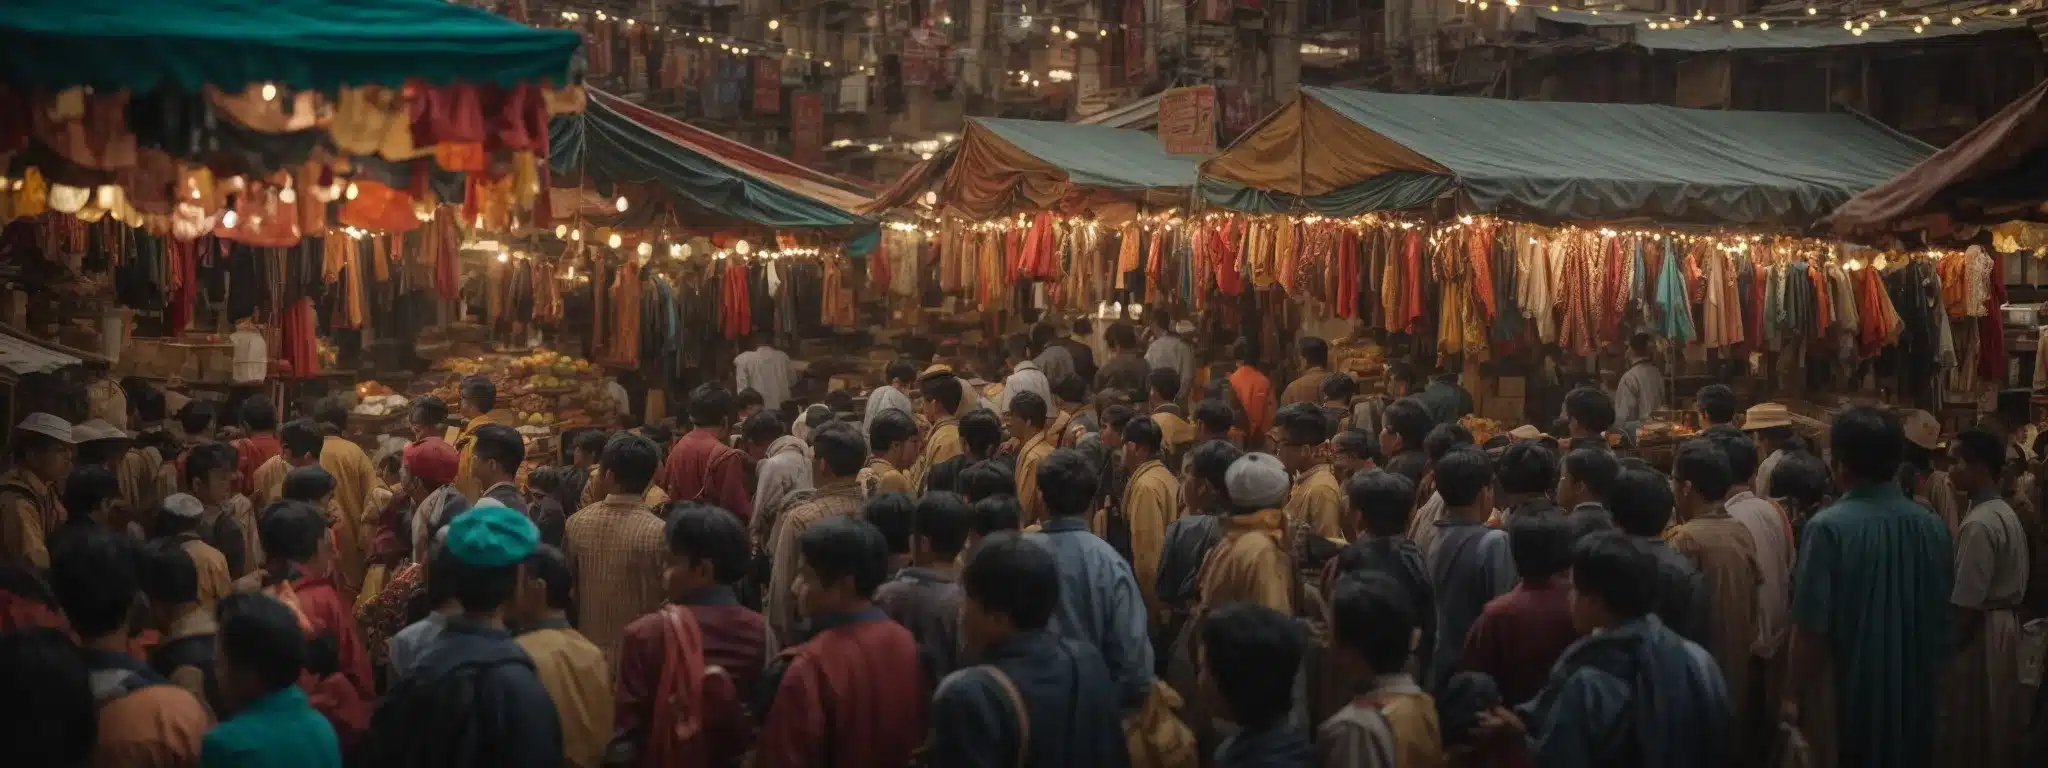 At A Crowded Marketplace, A Central Figure Captivates An Audience With An Enrapturing Narrative Amidst Vibrant Stalls.